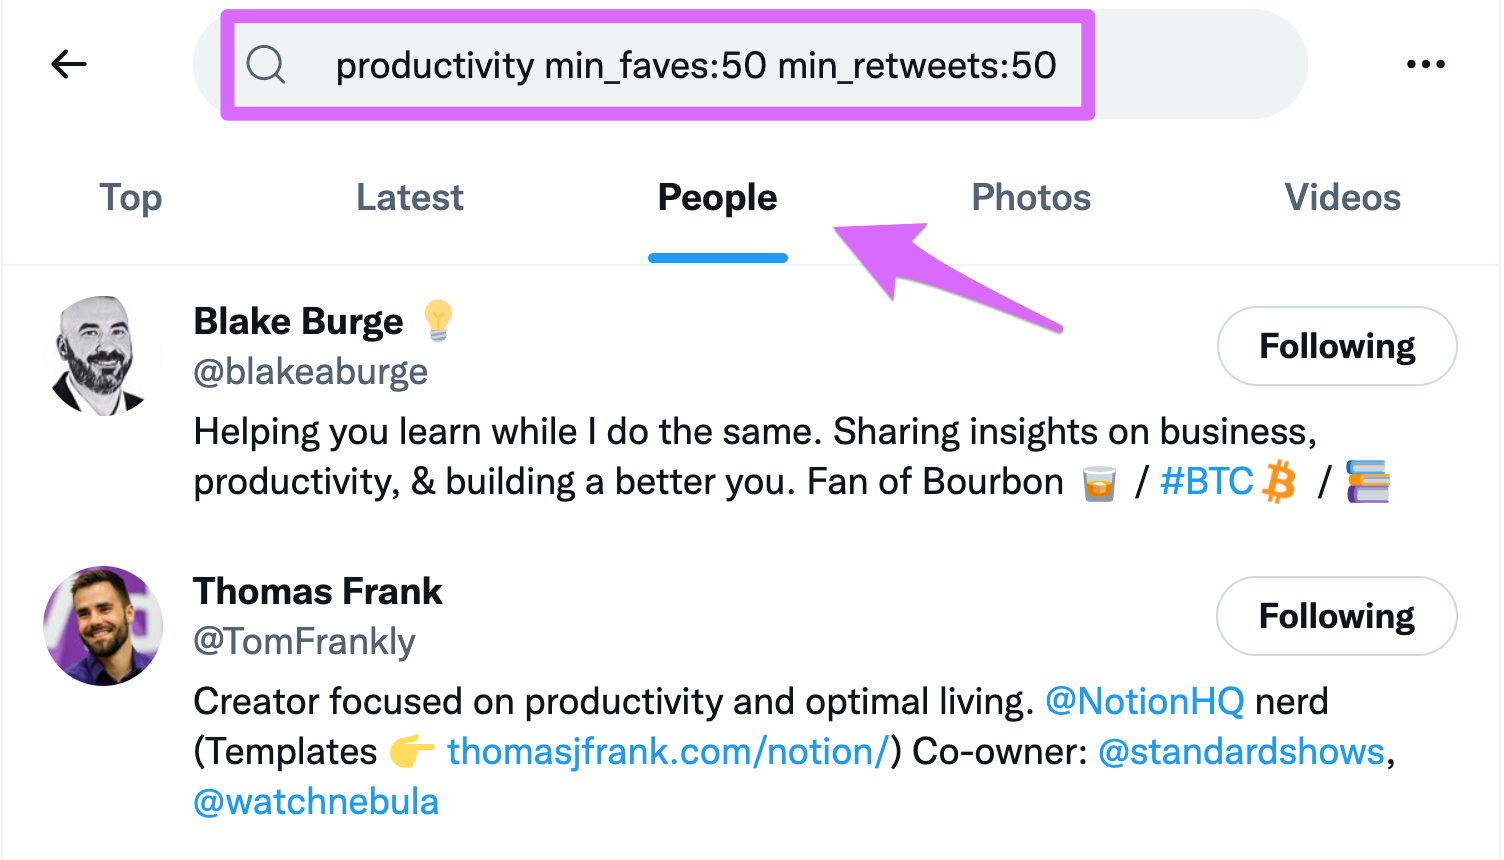 twitter influencers in productivity niche